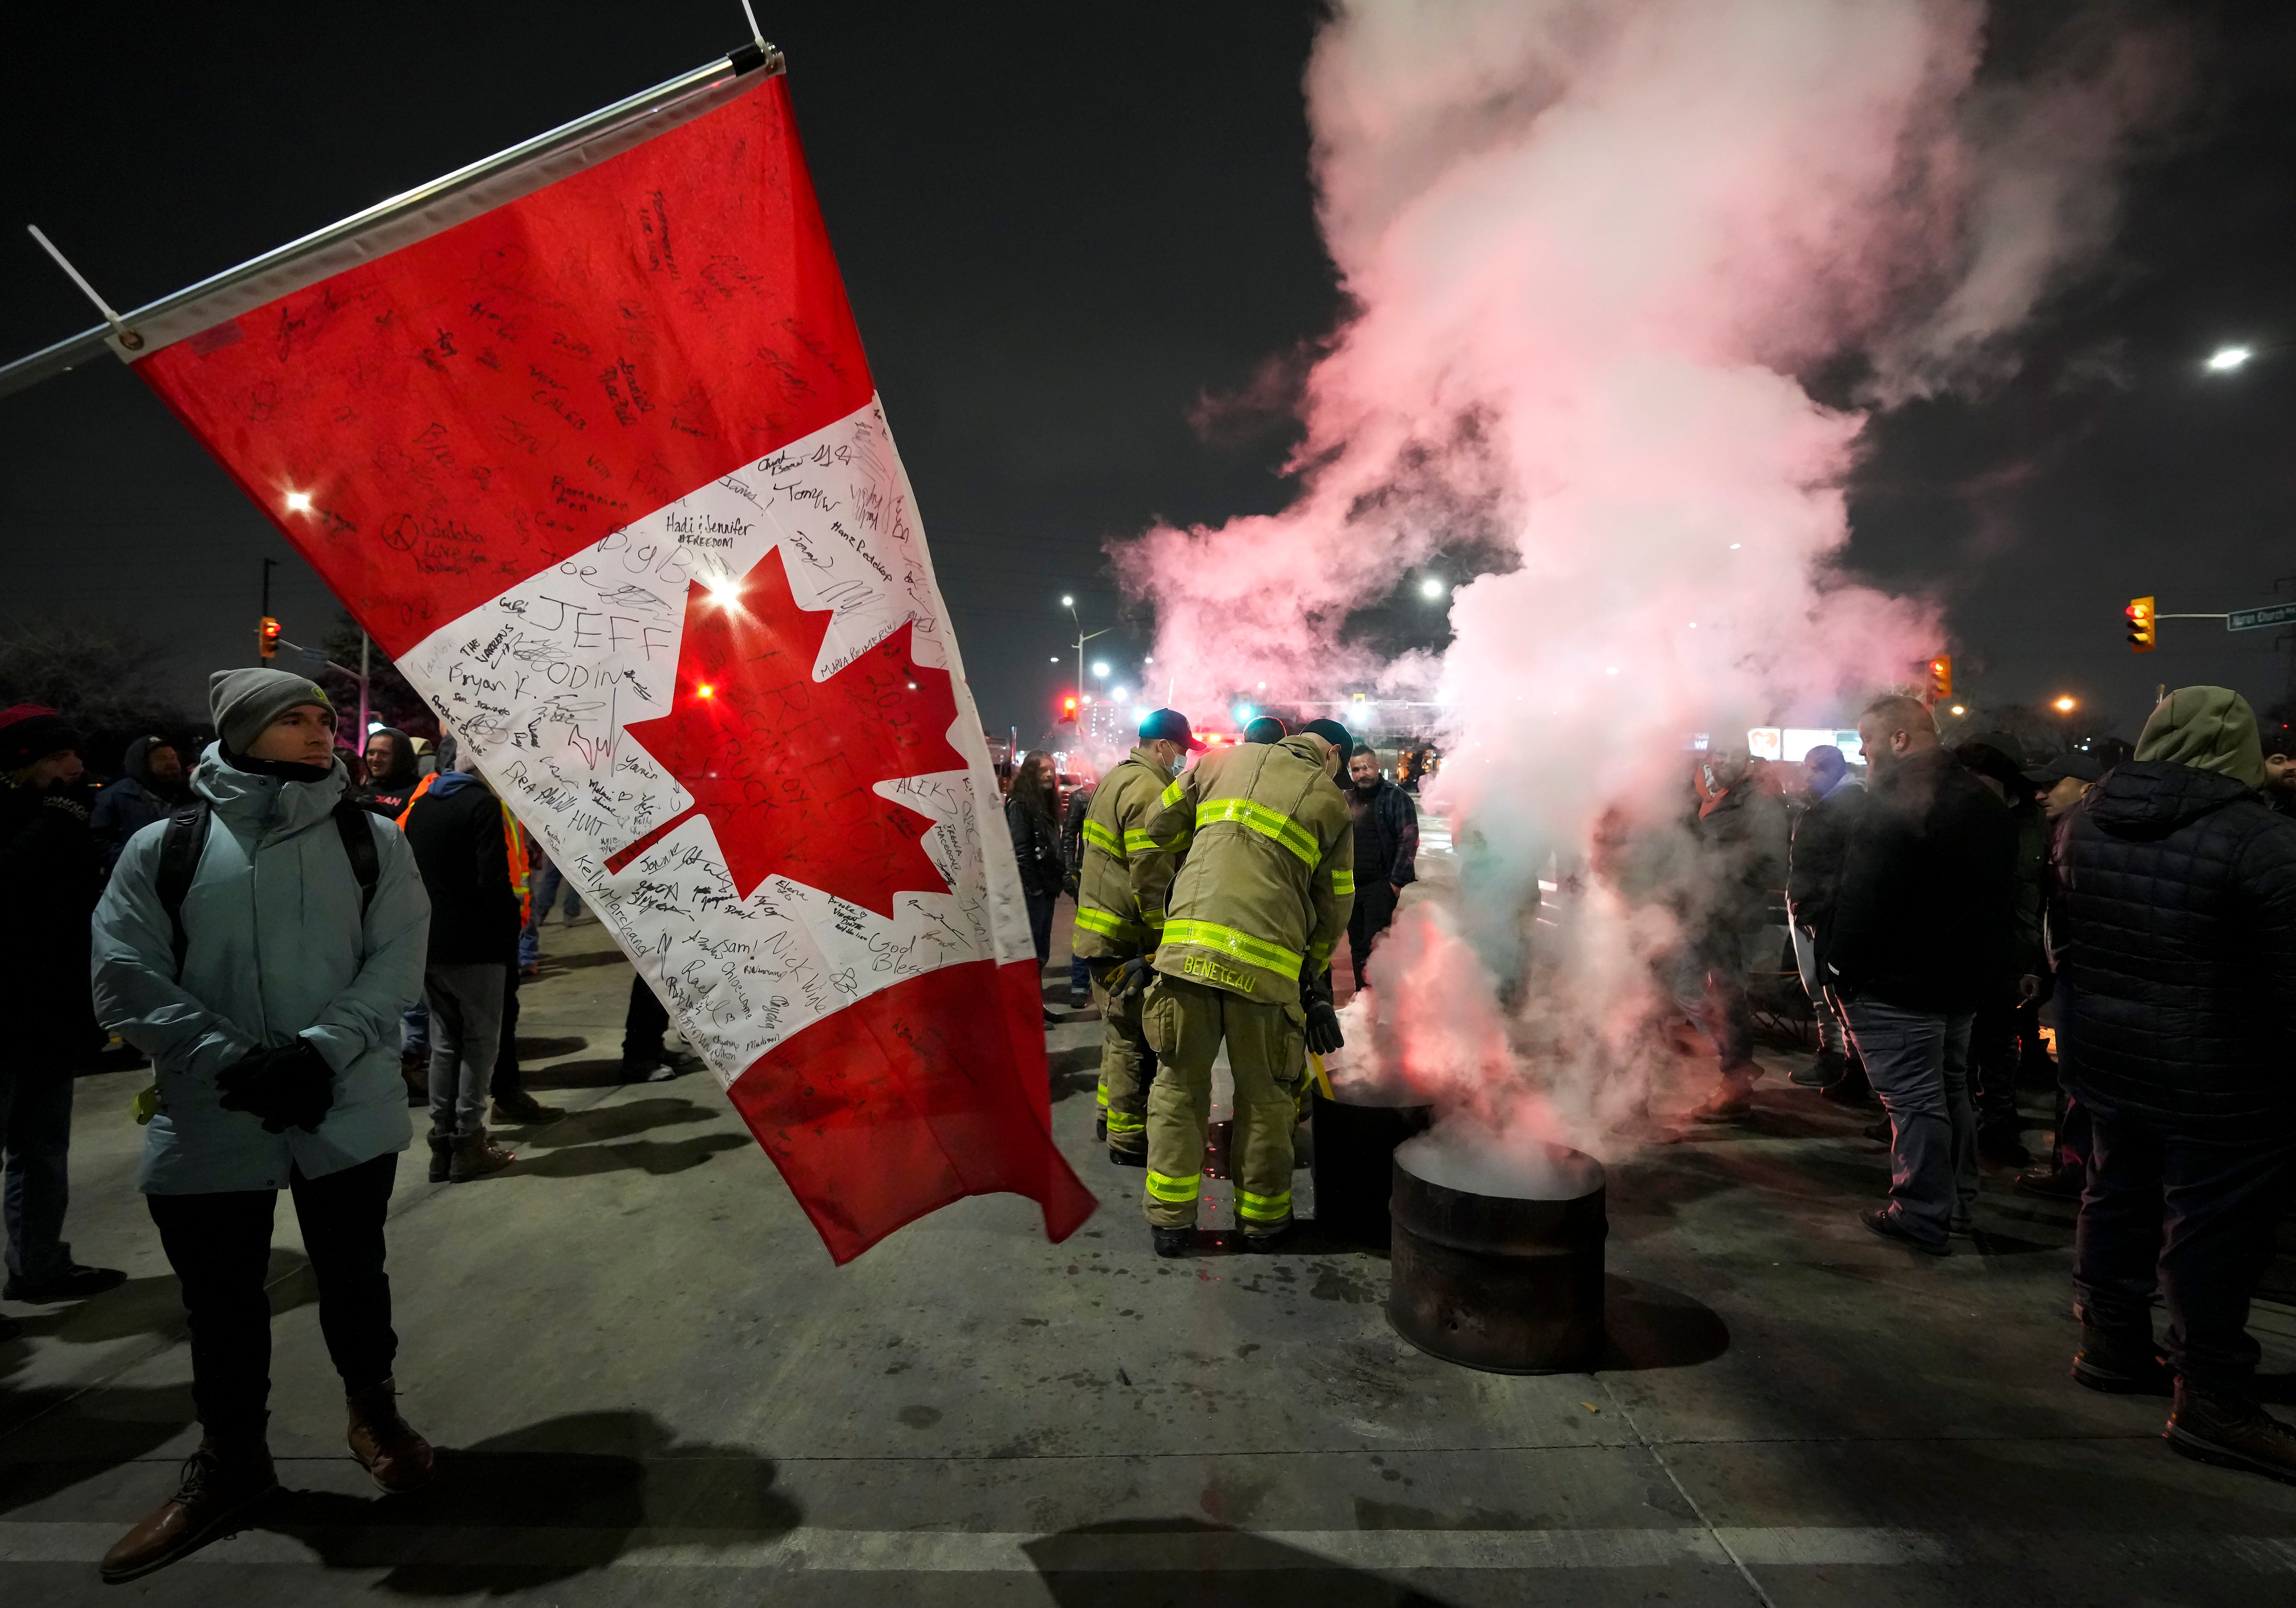 Firefighters put out a burning barrel fire as truckers and supporters block the access leading from the Ambassador Bridge, linking Detroit and Windsor, as truckers and their supporters continue to protest against the COVID-19 vaccine mandates and restrictions in Windsor, Ontario, on Wednesday, Feb. 9, 2022.